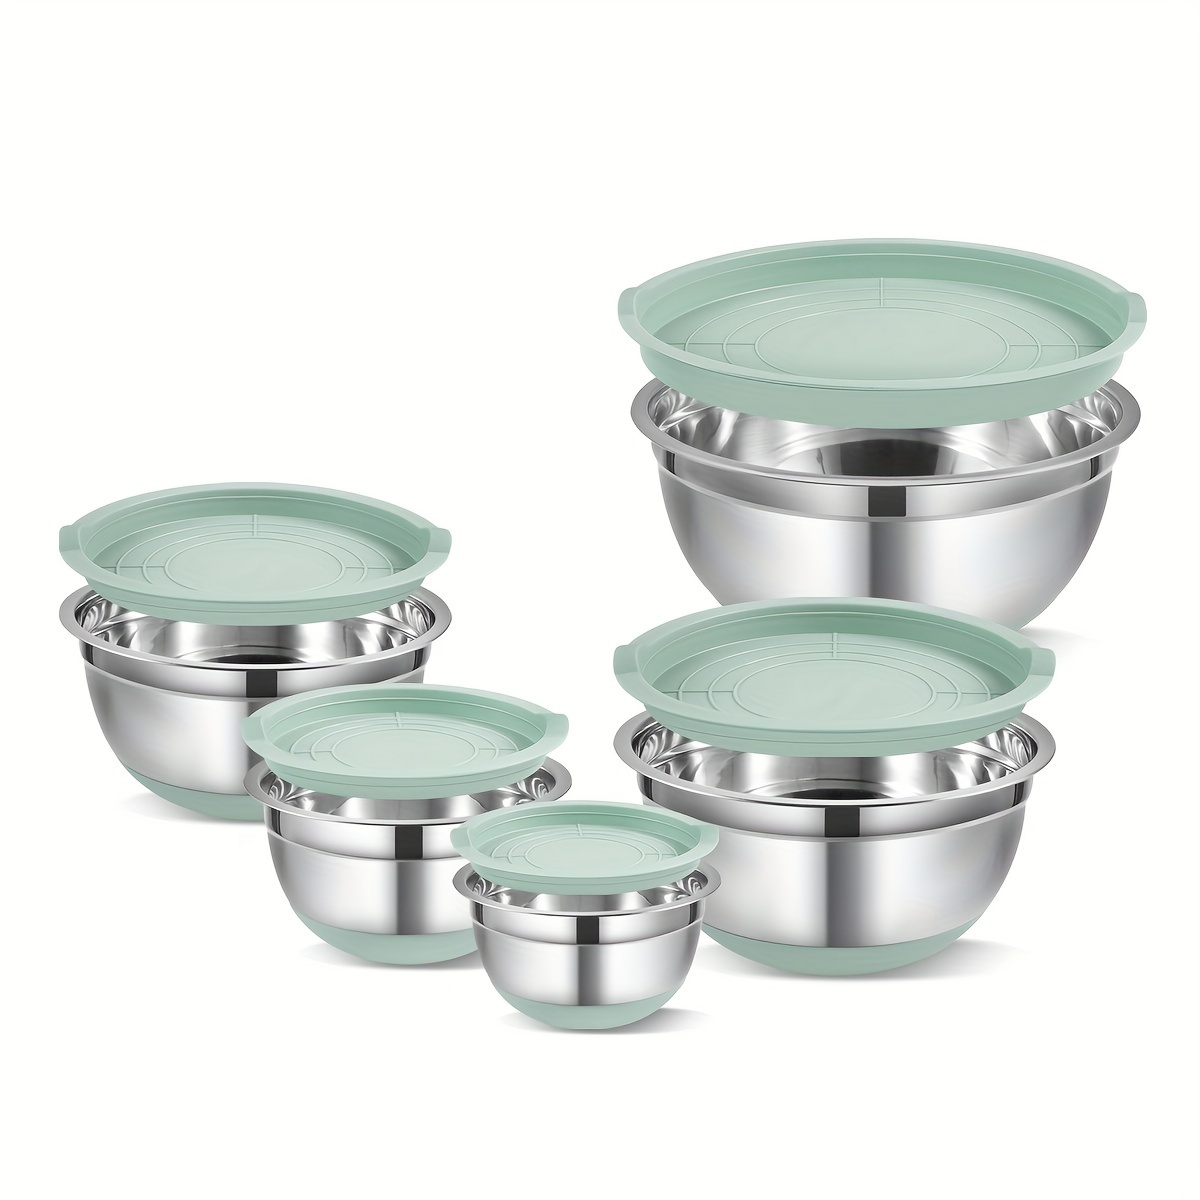 

10-piece Stainless Steel Mixing Bowls Set With Lids - Anti-slip Silicone Base, Nesting Kitchen Bowls For Cooking, Serving, Baking - Rust Resistant, Ideal For Holidays - 1l To 3.2l Sizes